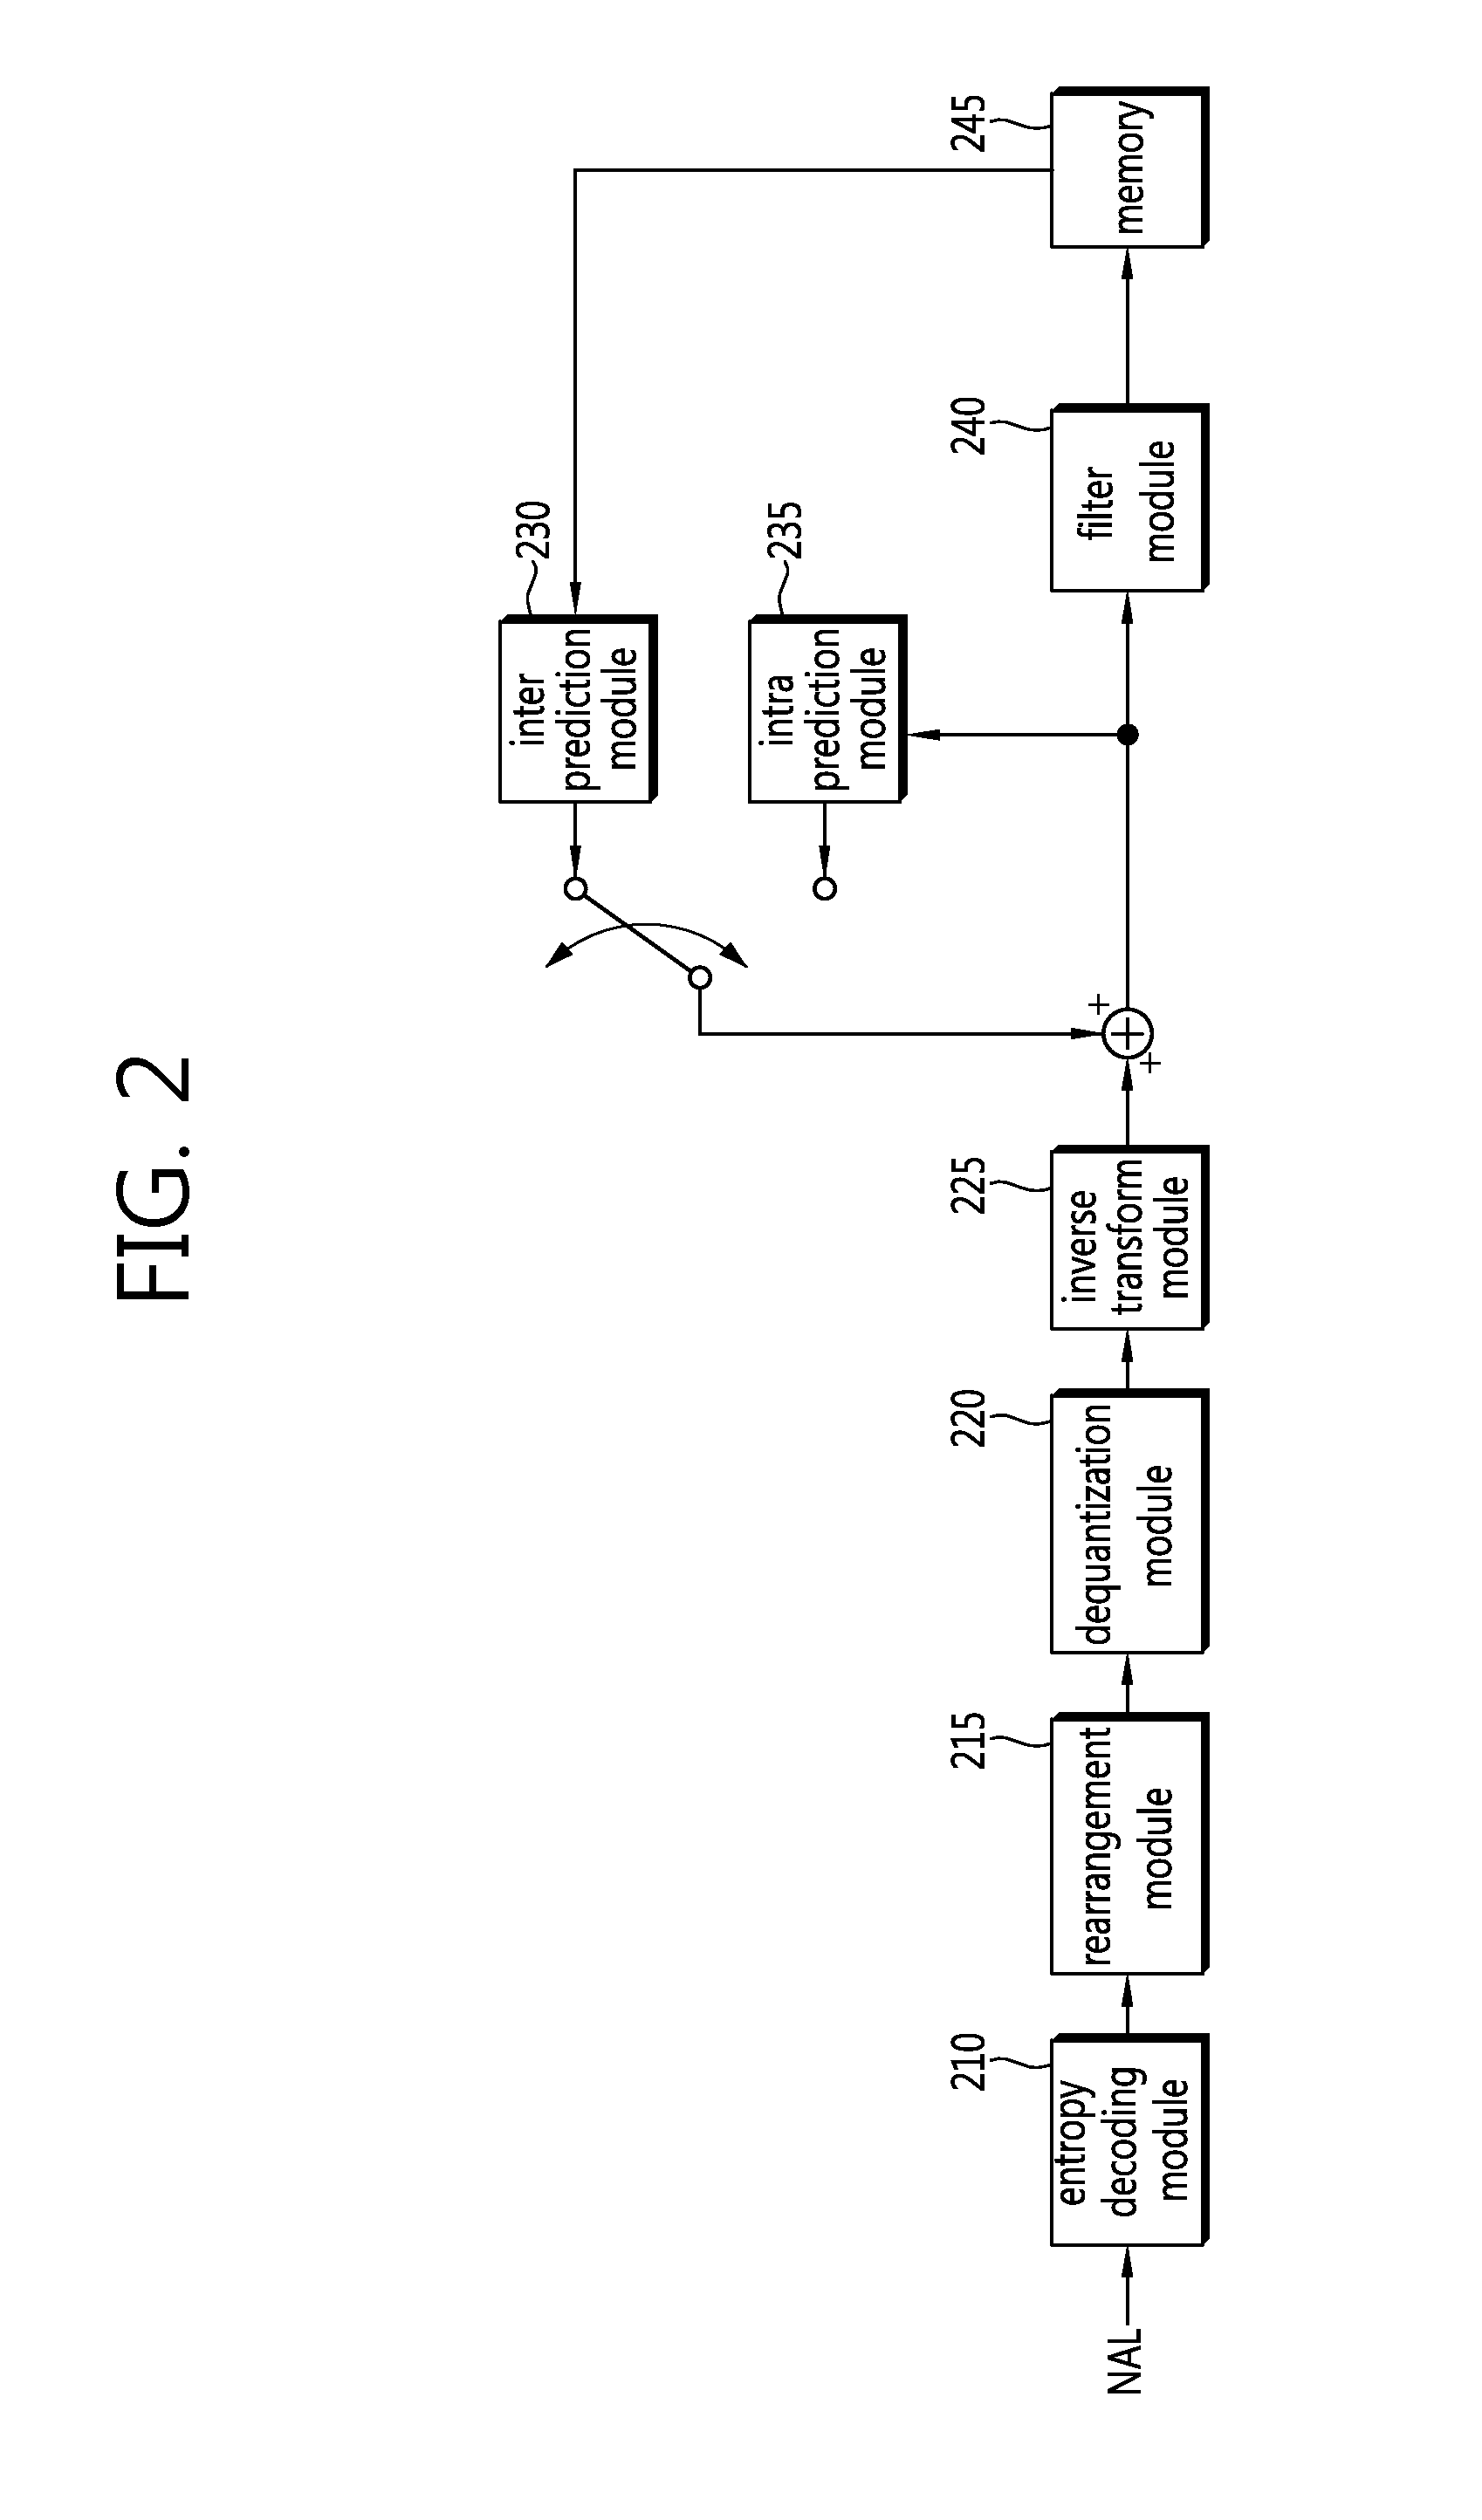 Adaptive transform method based on in-screen prediction and apparatus using the method